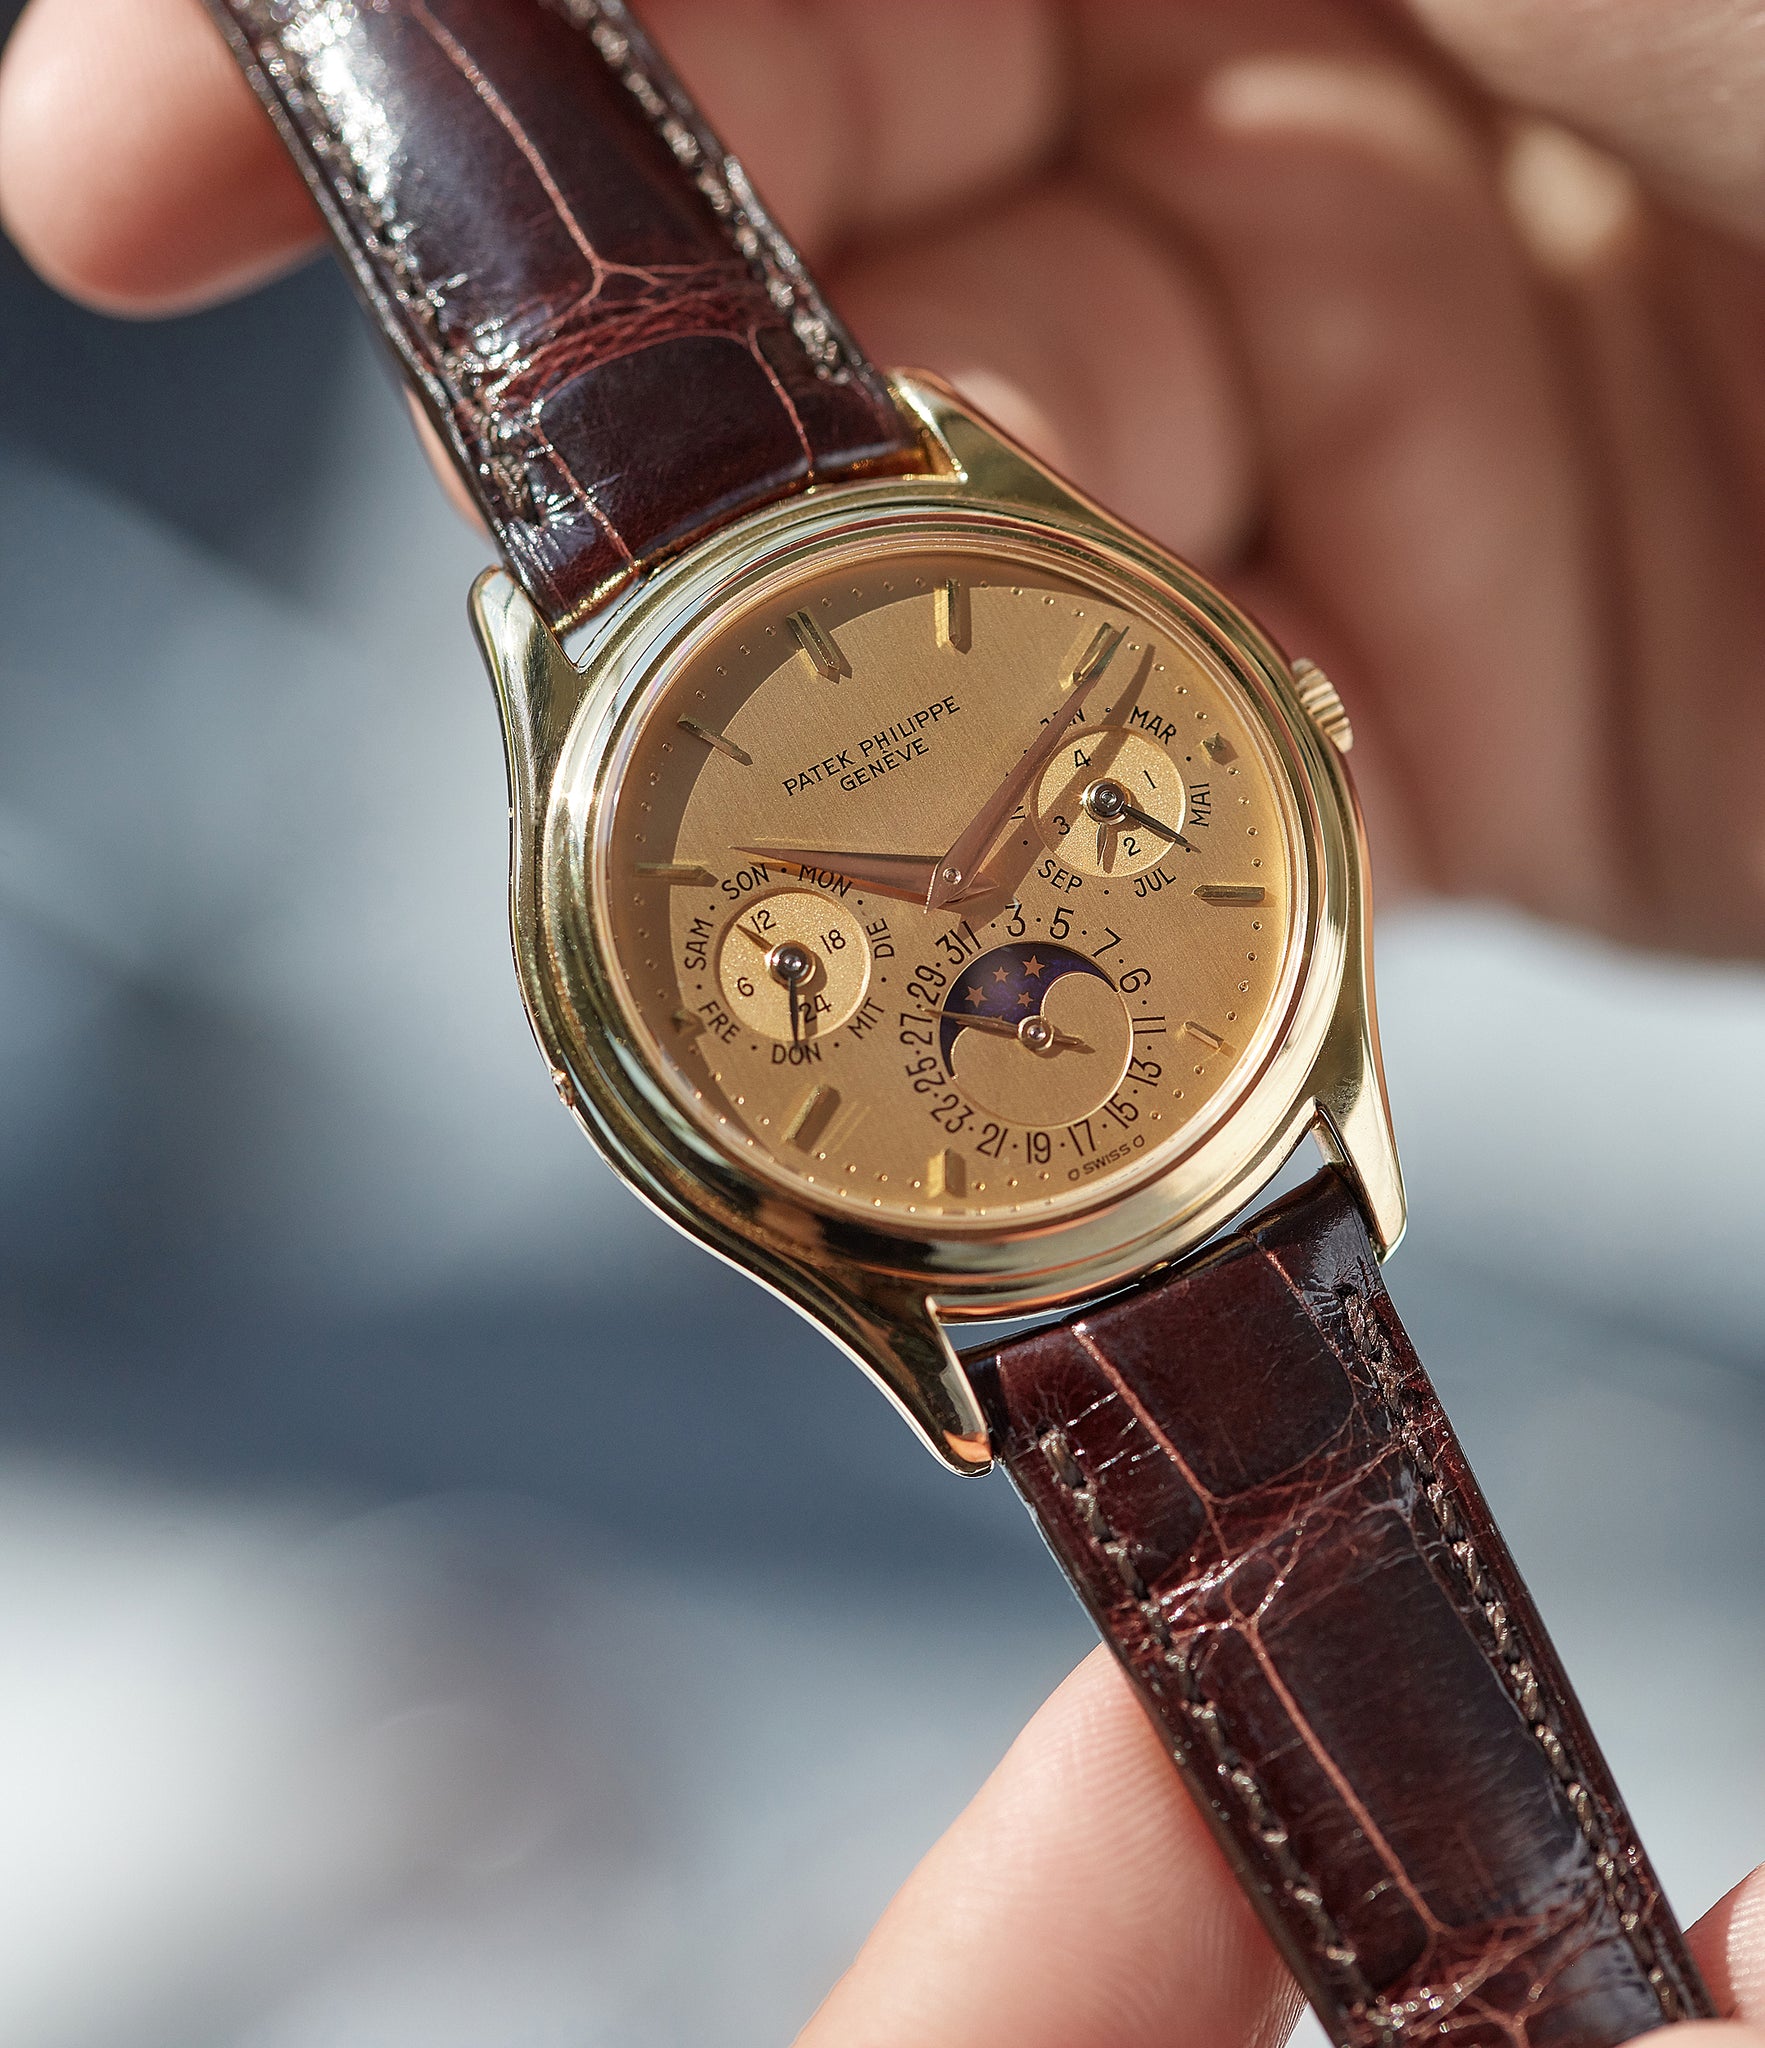 Patek Philippe 3940 first series with a gold dial, very rare